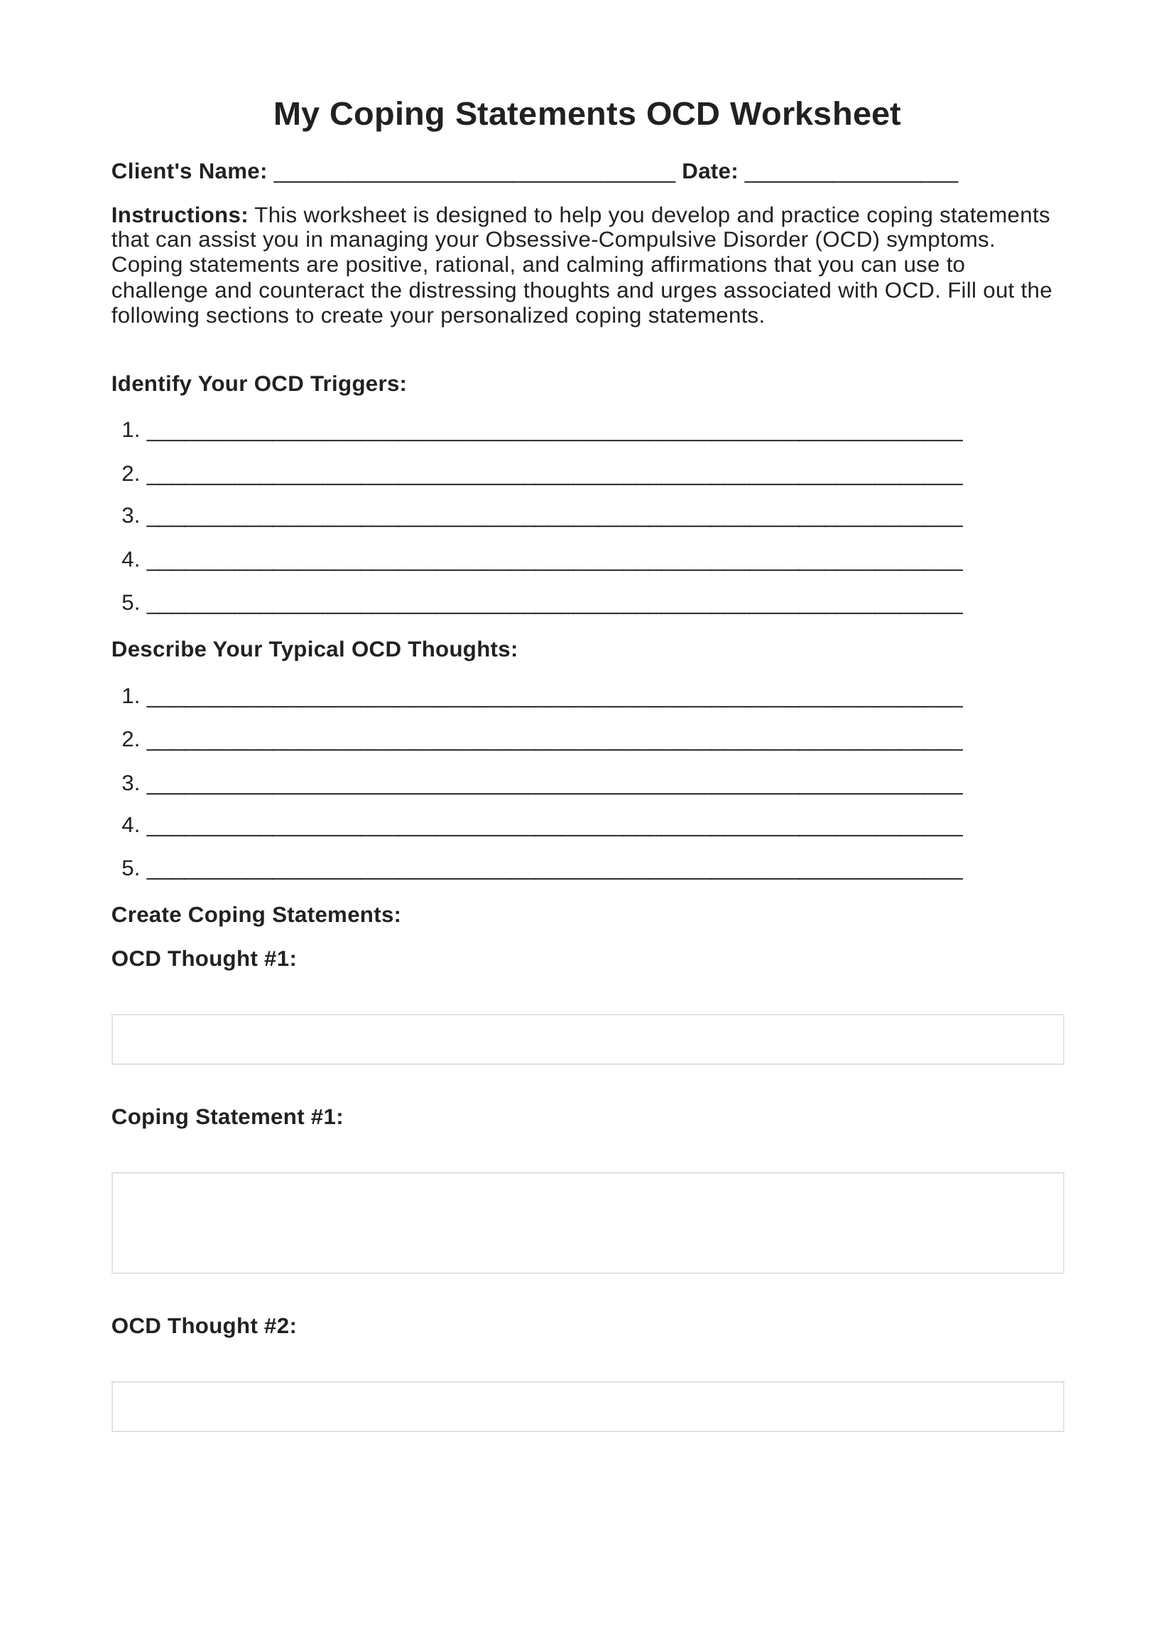 My Coping Statements OCD Worksheet PDF Example